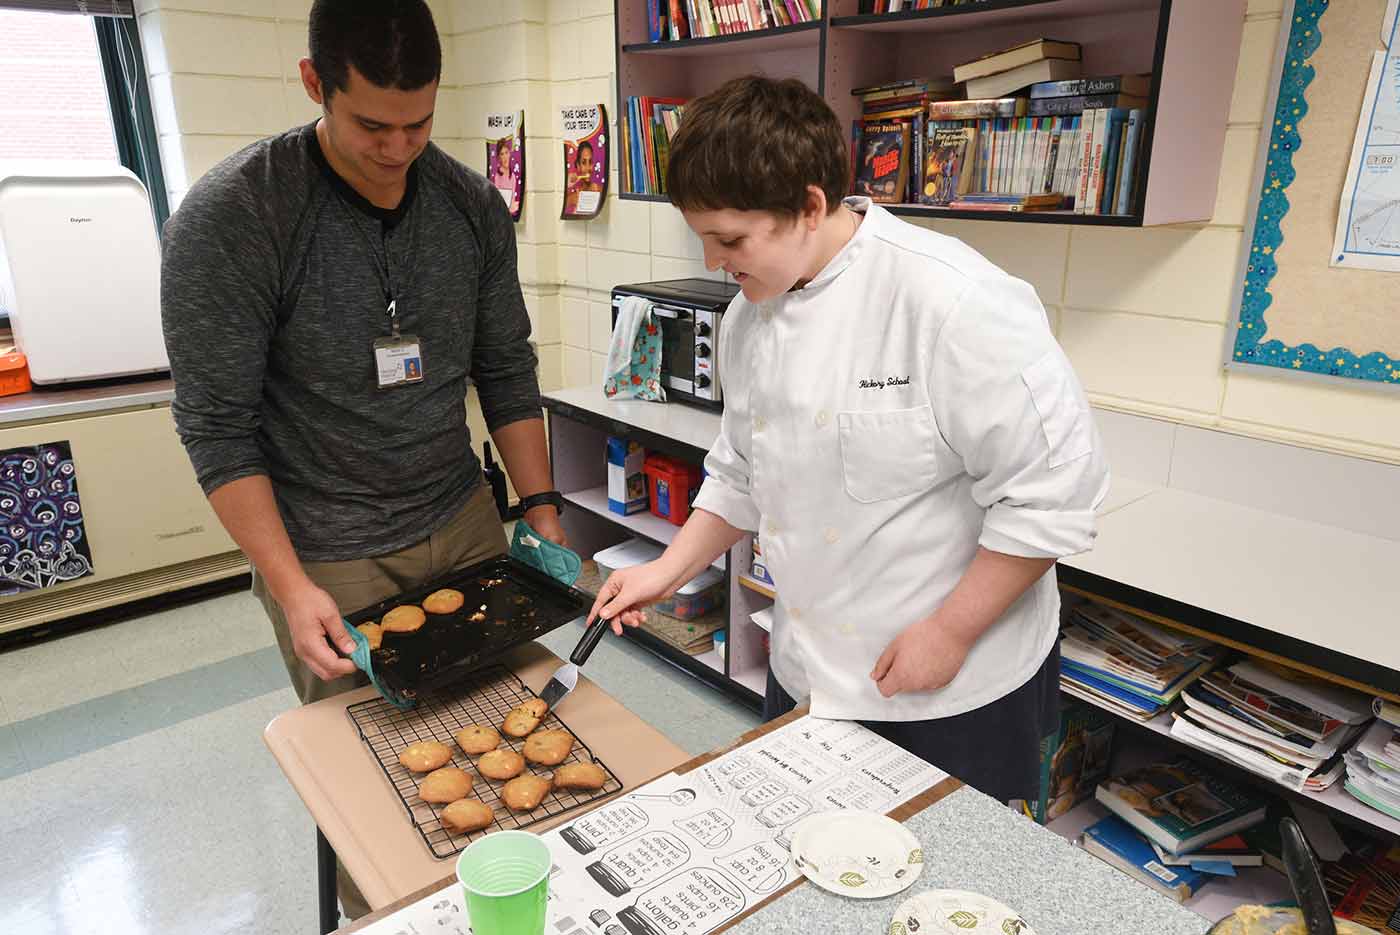 Two Natchaug students take cookies from a cookie sheet and place them on a cooling rack during cooking class